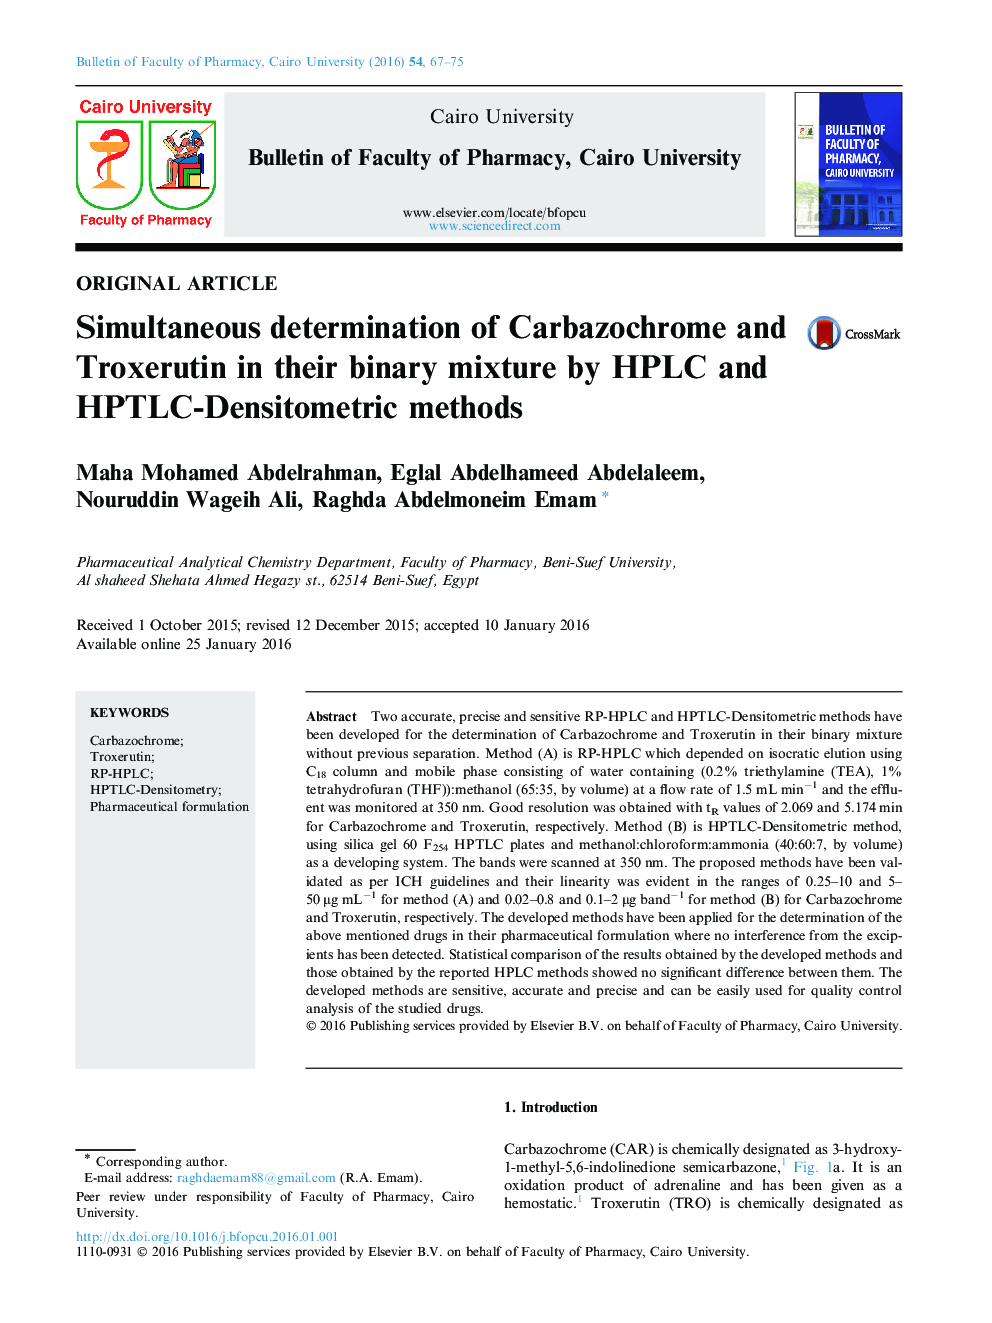 Simultaneous determination of Carbazochrome and Troxerutin in their binary mixture by HPLC and HPTLC-Densitometric methods 